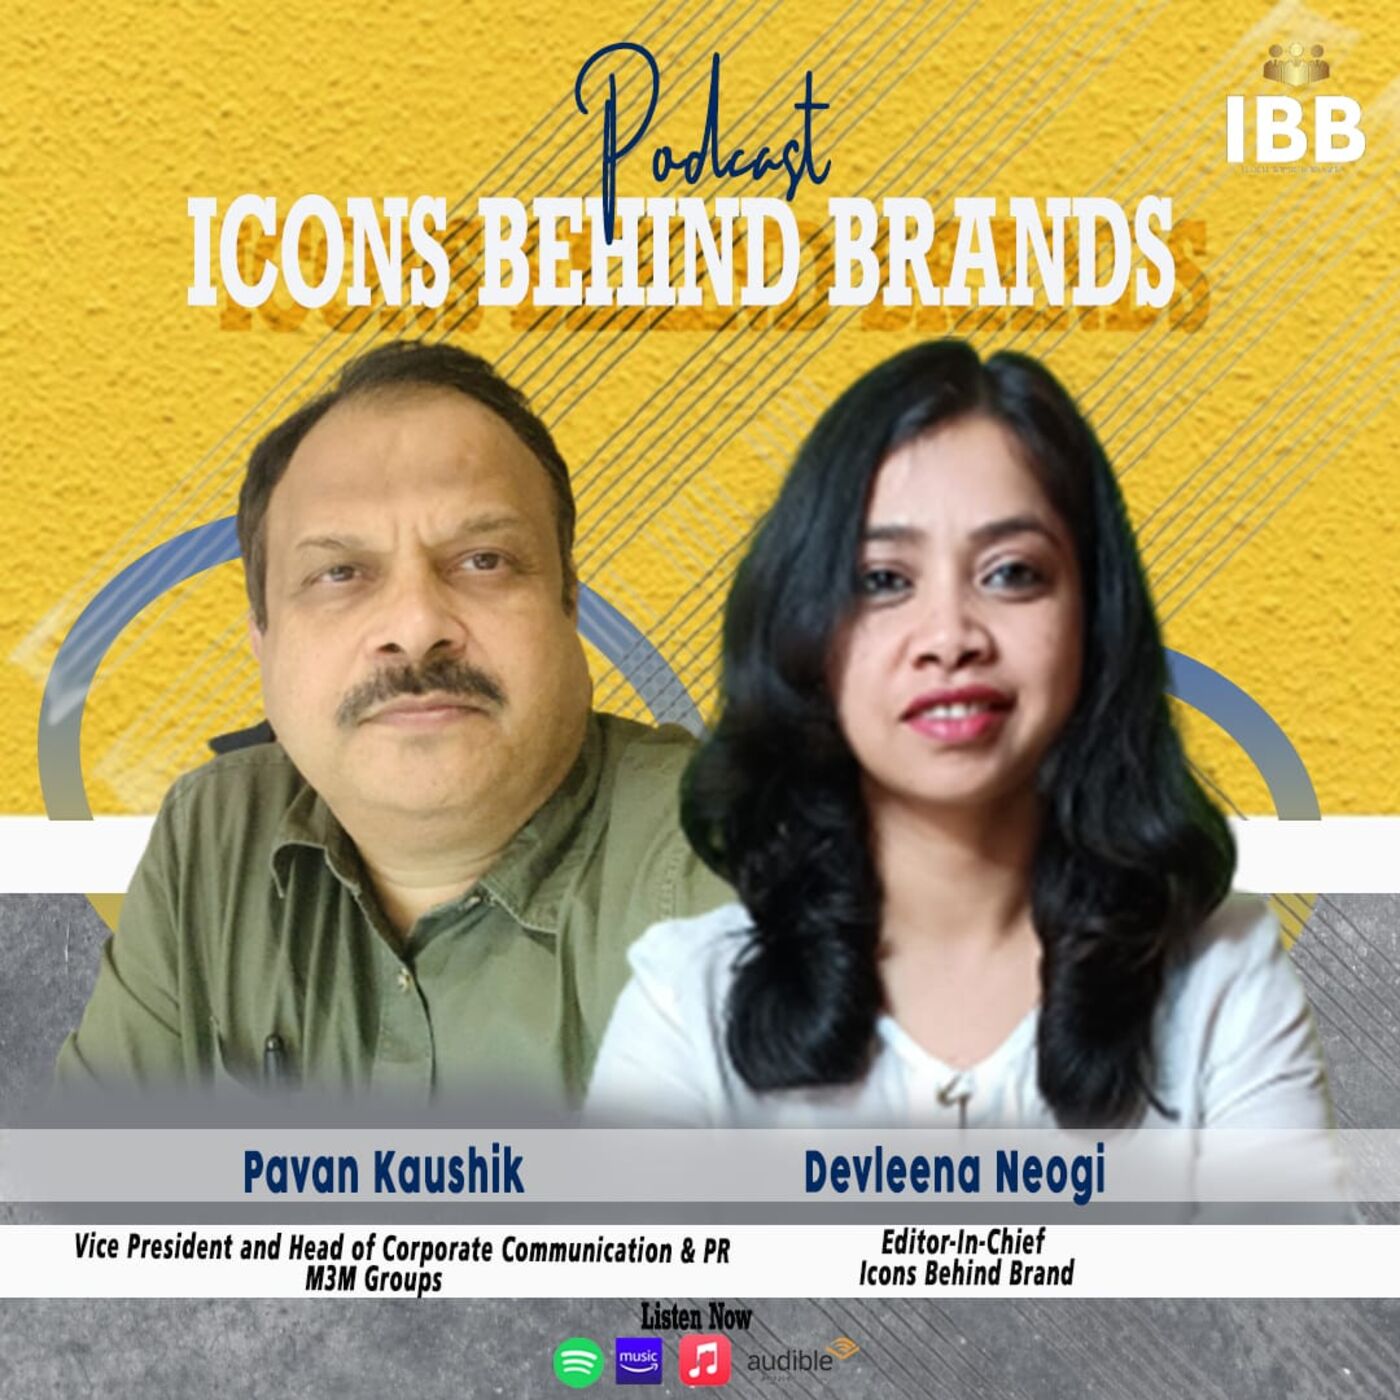 Get Insights of Marketing Functions| Mr. Pavan Kaushik| Vice President and Head Corporate Communication & PR| M3M India Group| IBB